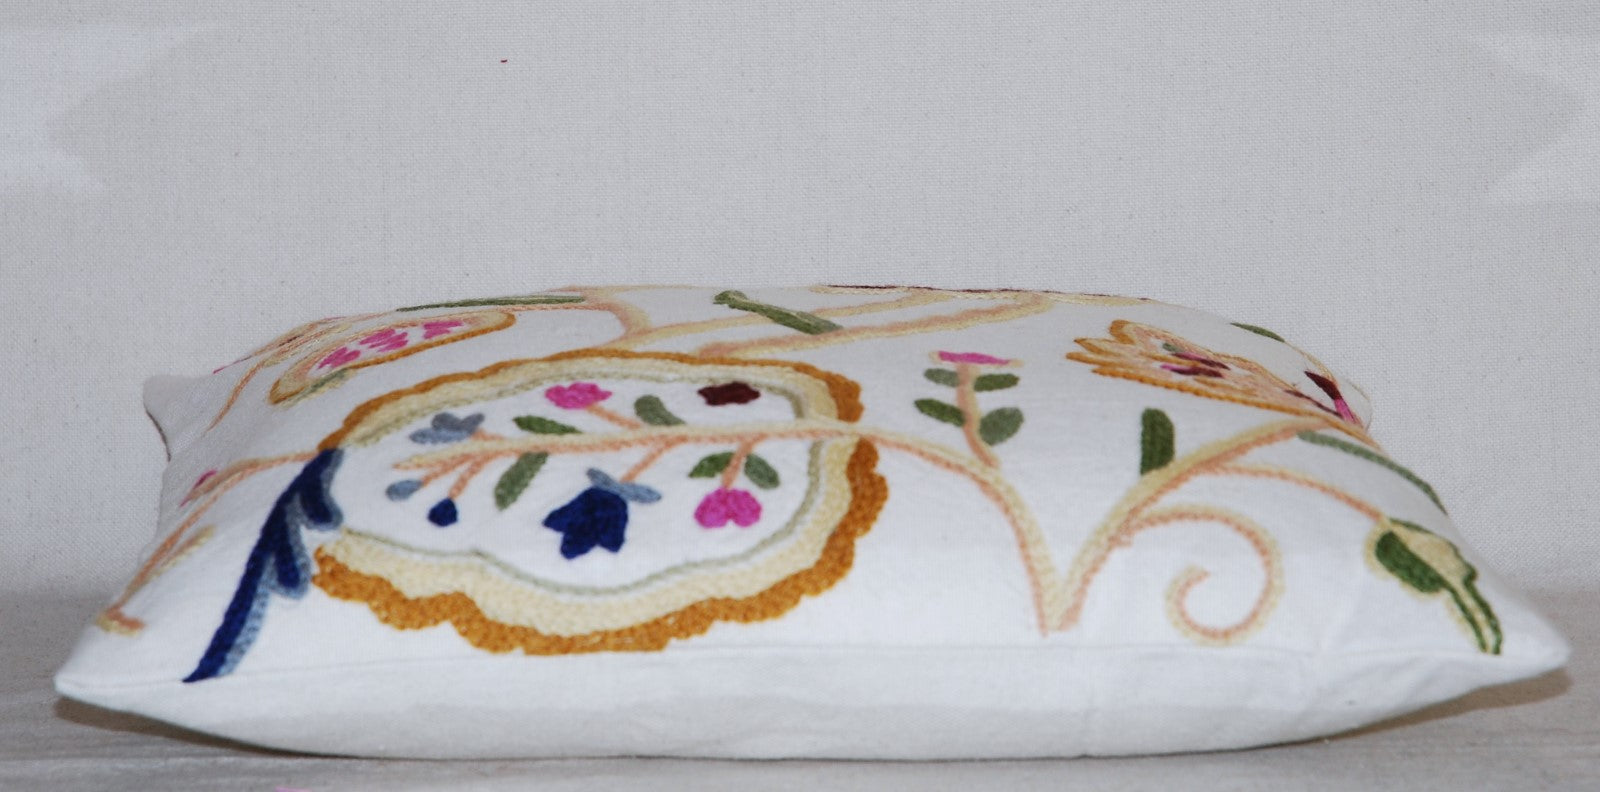 Crewel Embroidery Throw Pillowcase, Cushion Cover "Watlab", Multicolor Pastels #CW326